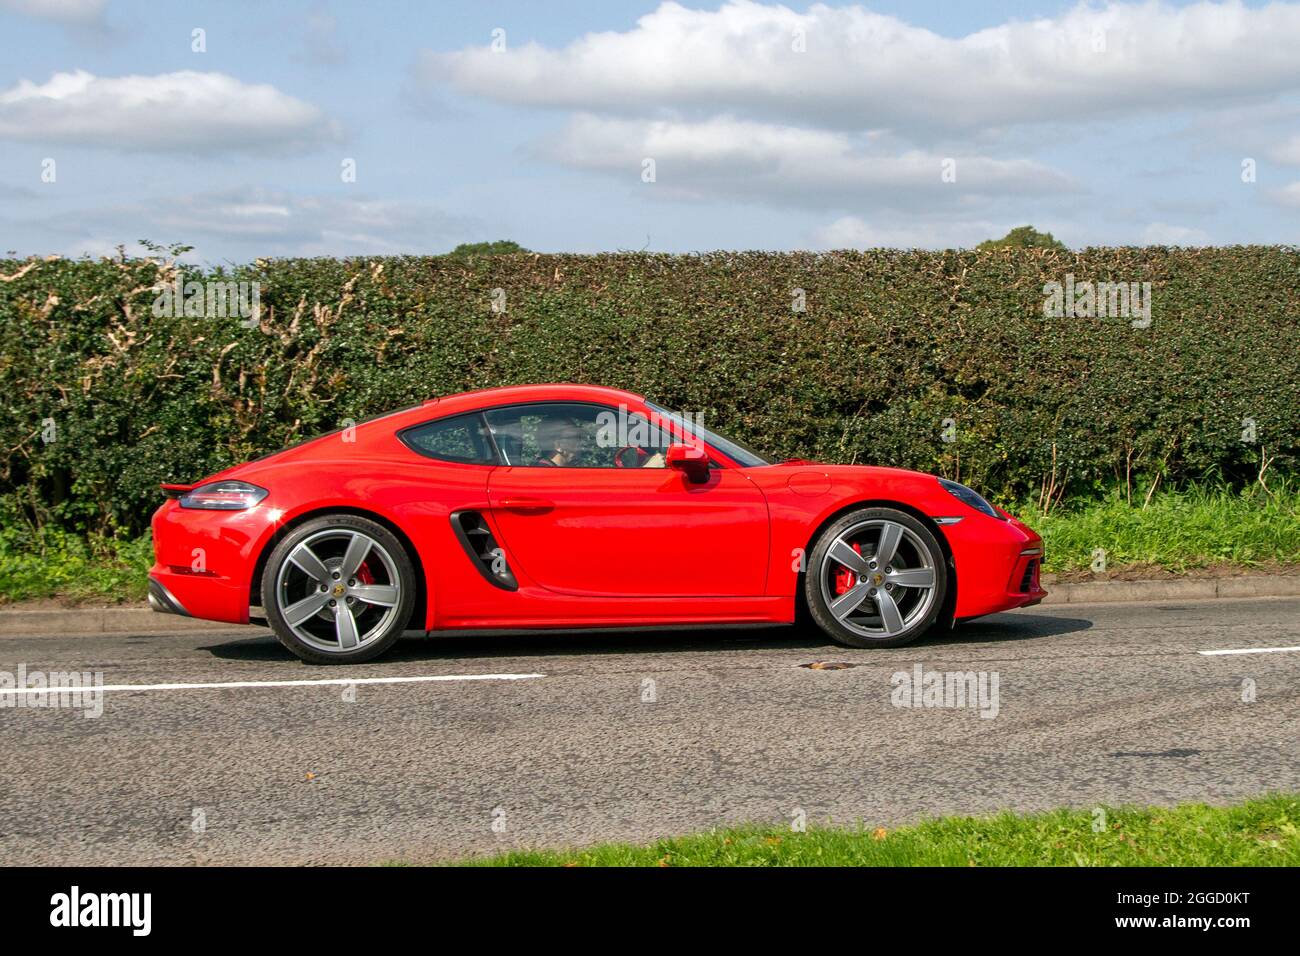 2017 red Porsche Cayman S PDK 7 speed automatic 2497cc petrol sports car, en-route to Capesthorne Hall classic August car show, Cheshire, UK Stock Photo